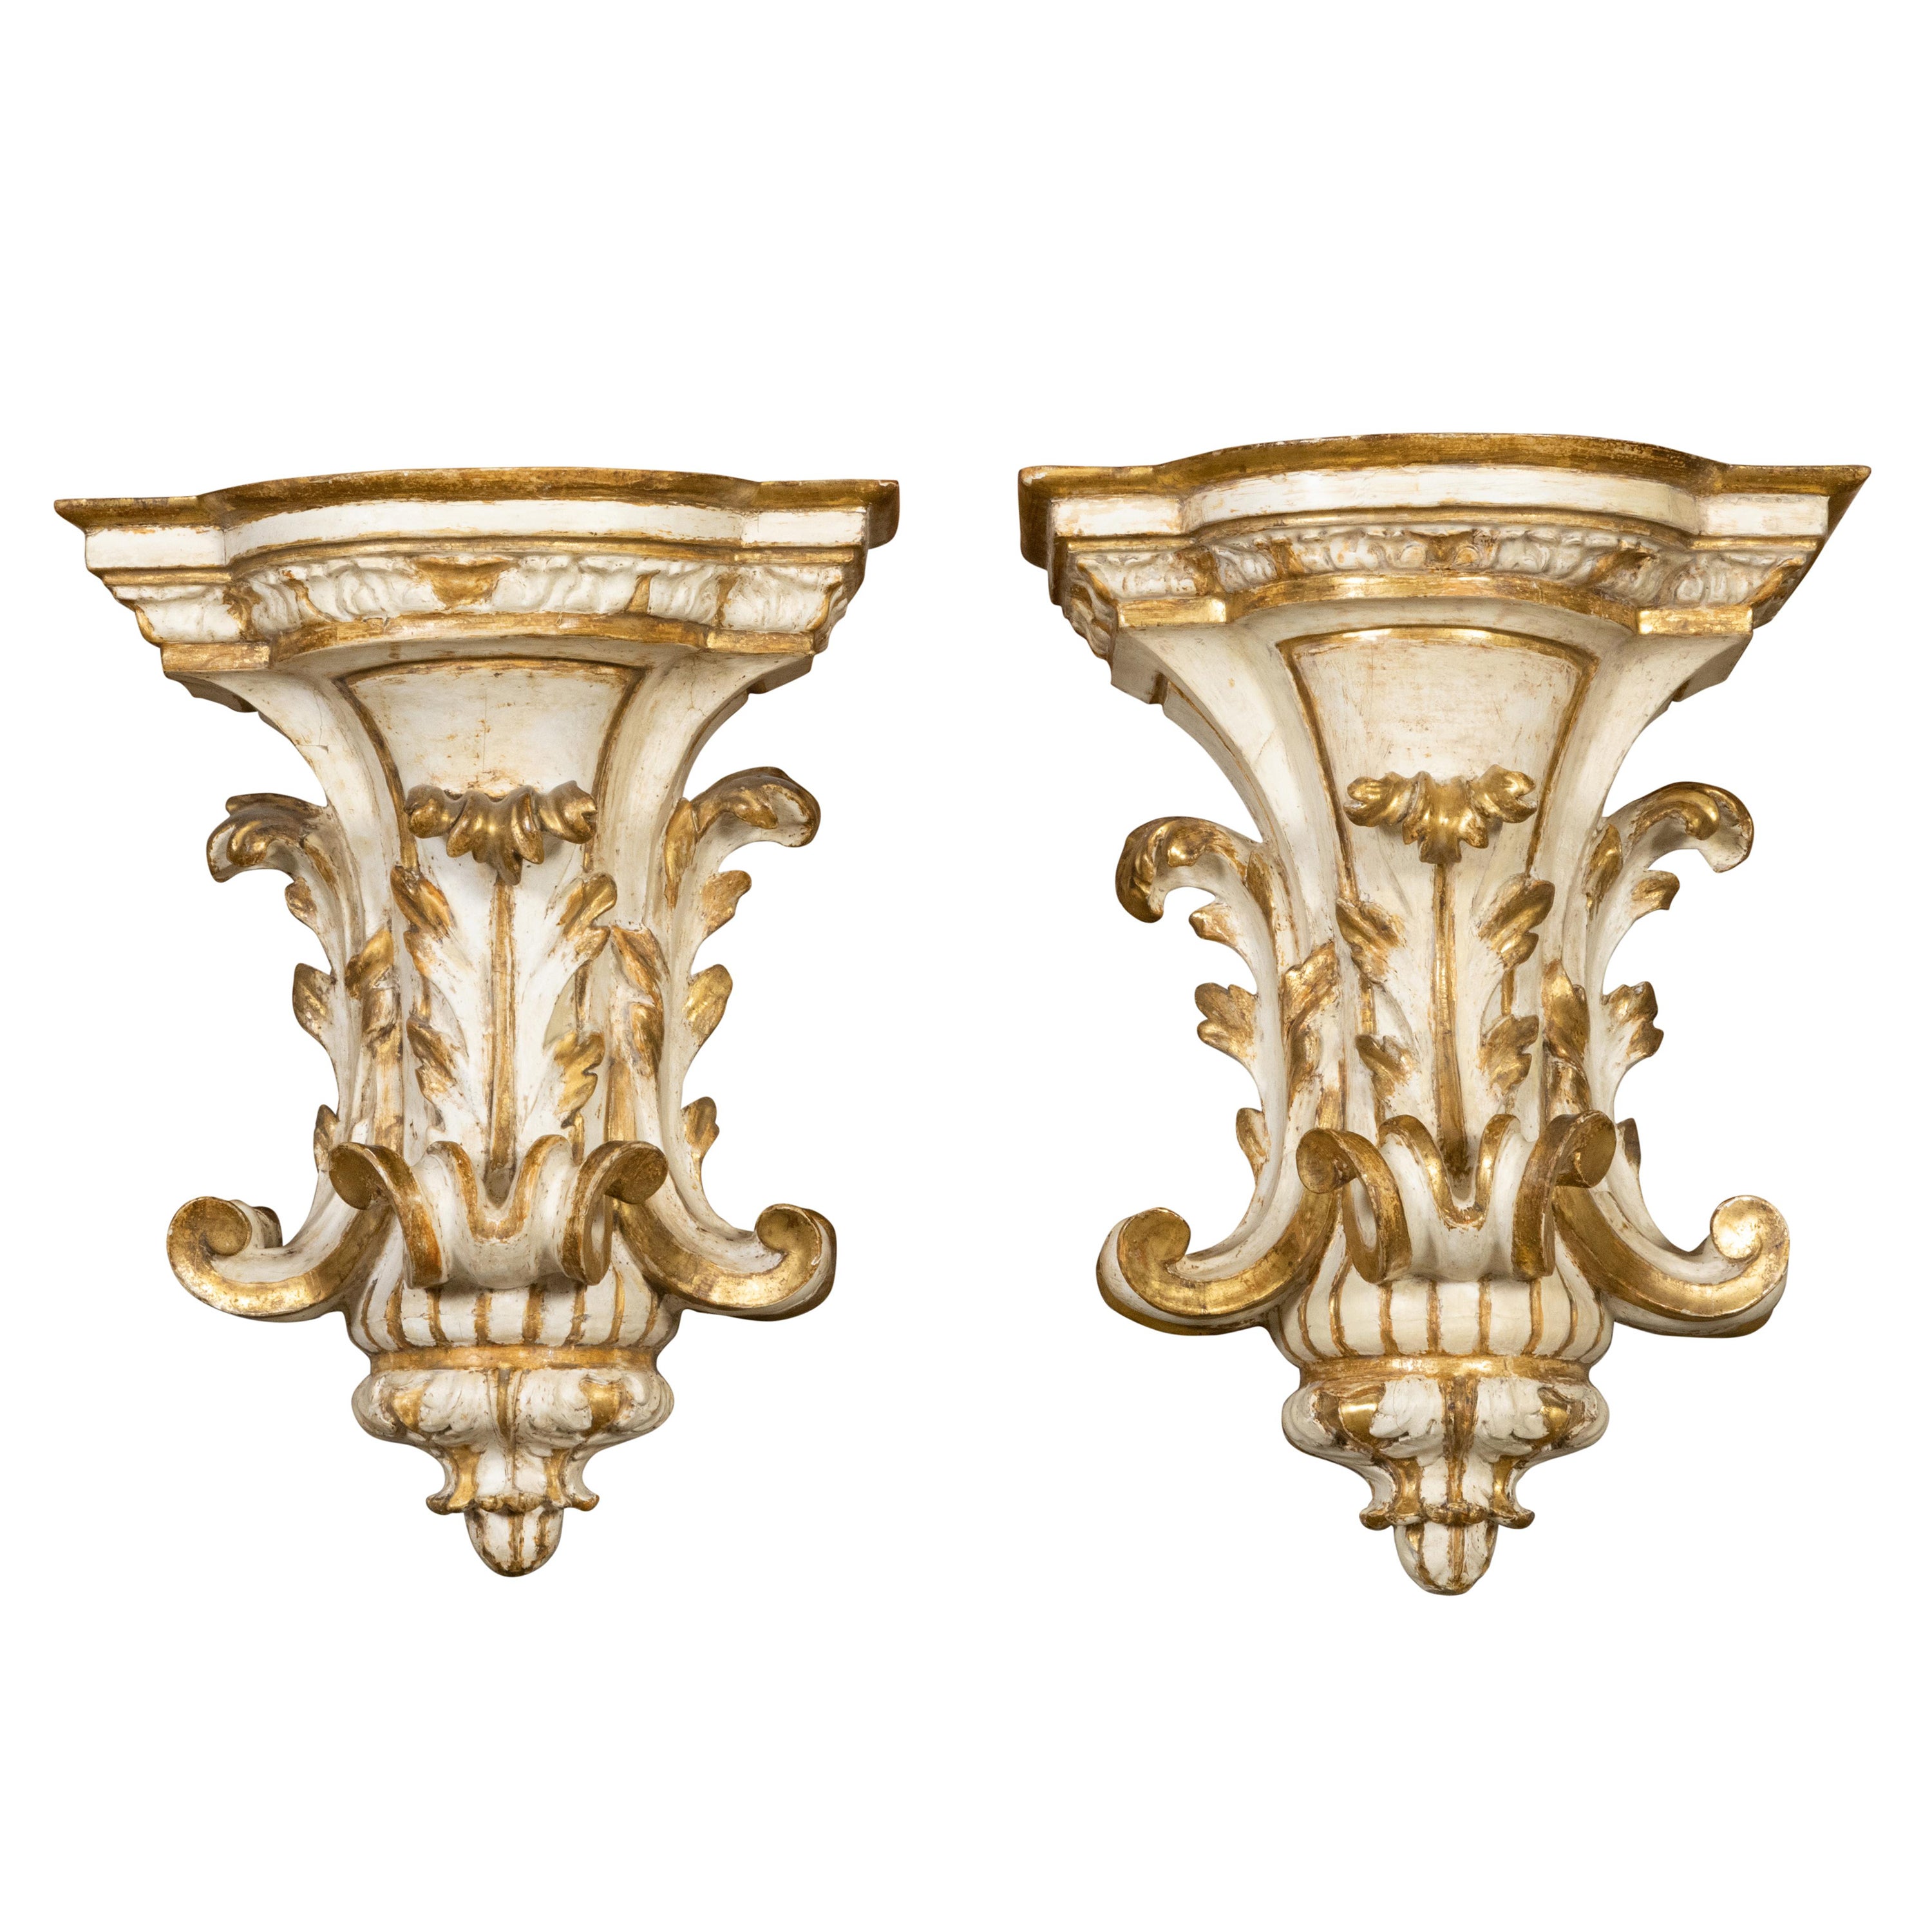 Pair of Italian 1800s Painted and Parcel-Gilt Wall Brackets with Acanthus Leaves